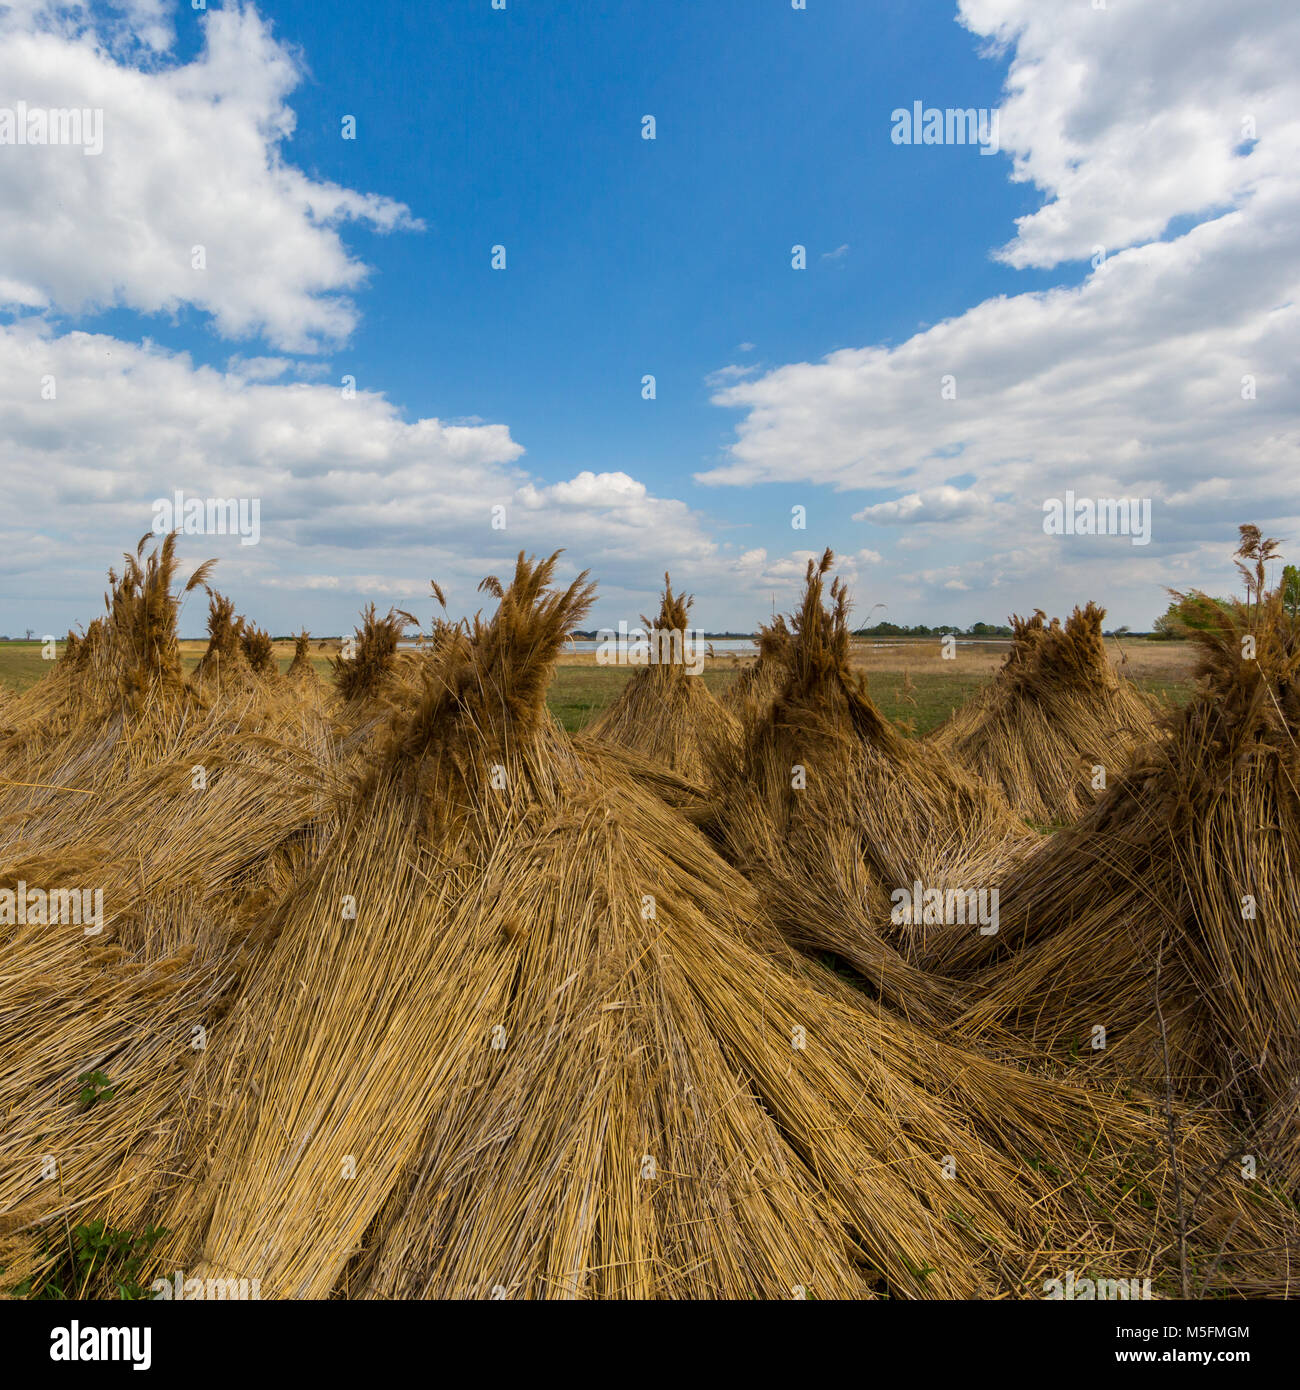 natural bundles of reed for drying with blue sky and clouds Stock Photo